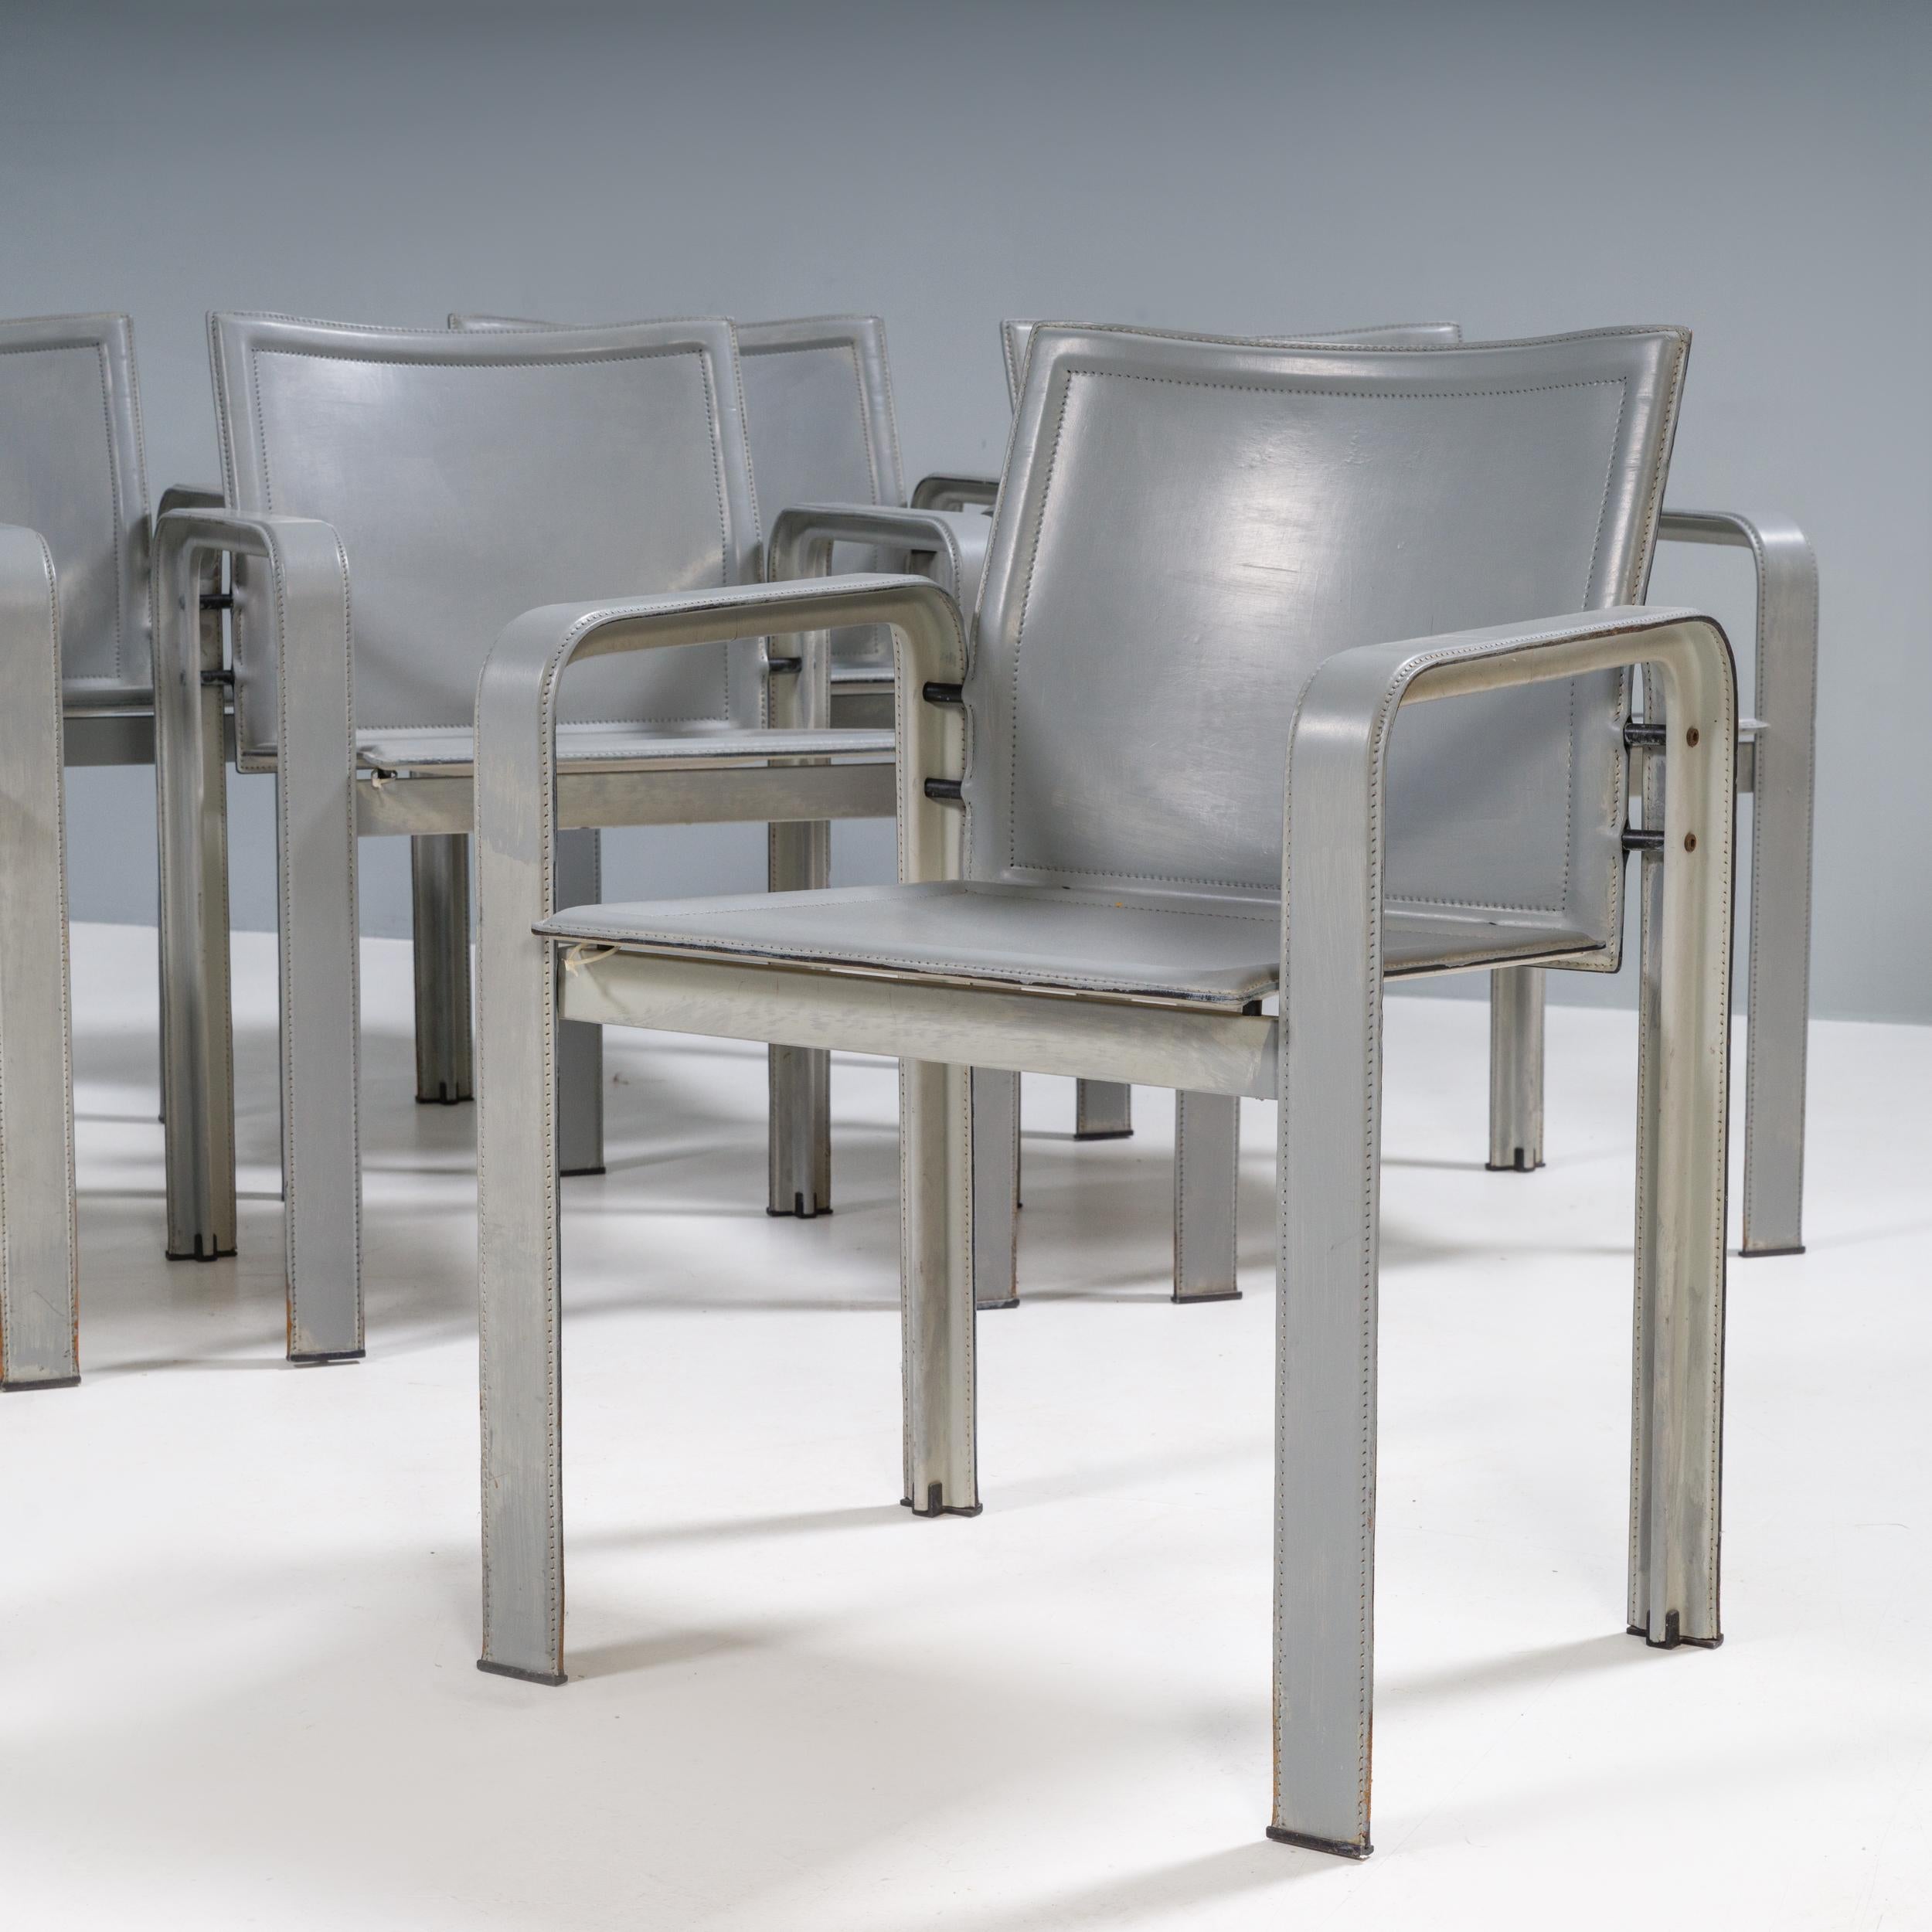 Matteo Grassi Golfo Dei Poeti Grey Leather Dining Chairs, Set of 10 In Fair Condition For Sale In London, GB